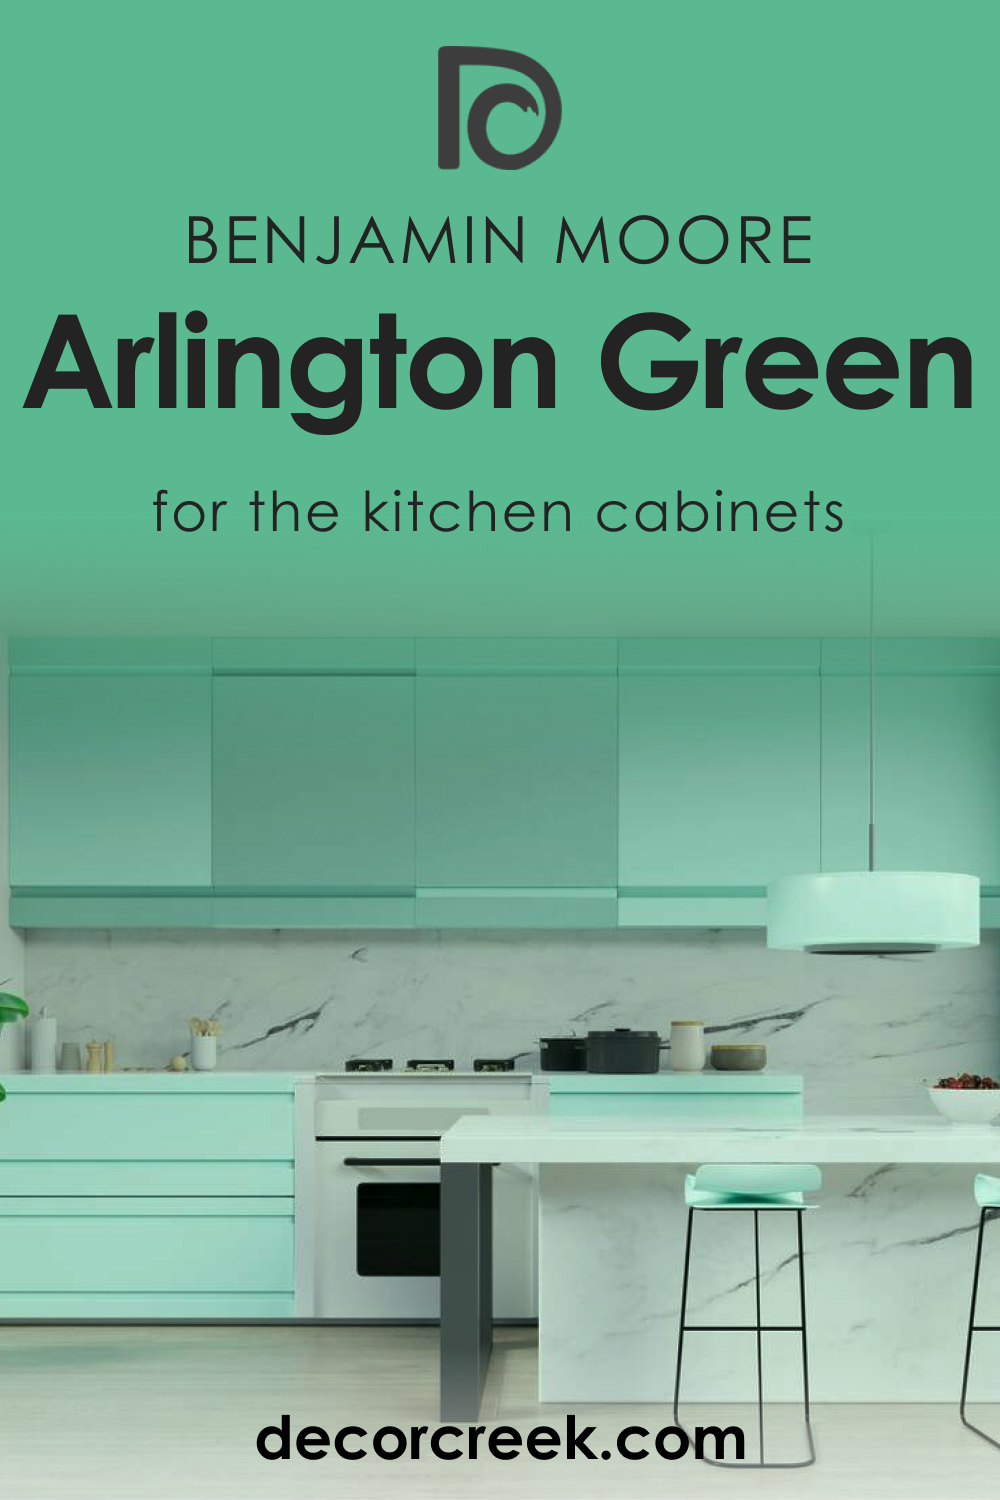 How to Use Arlington Green 580 on Kitchen Cabinets?